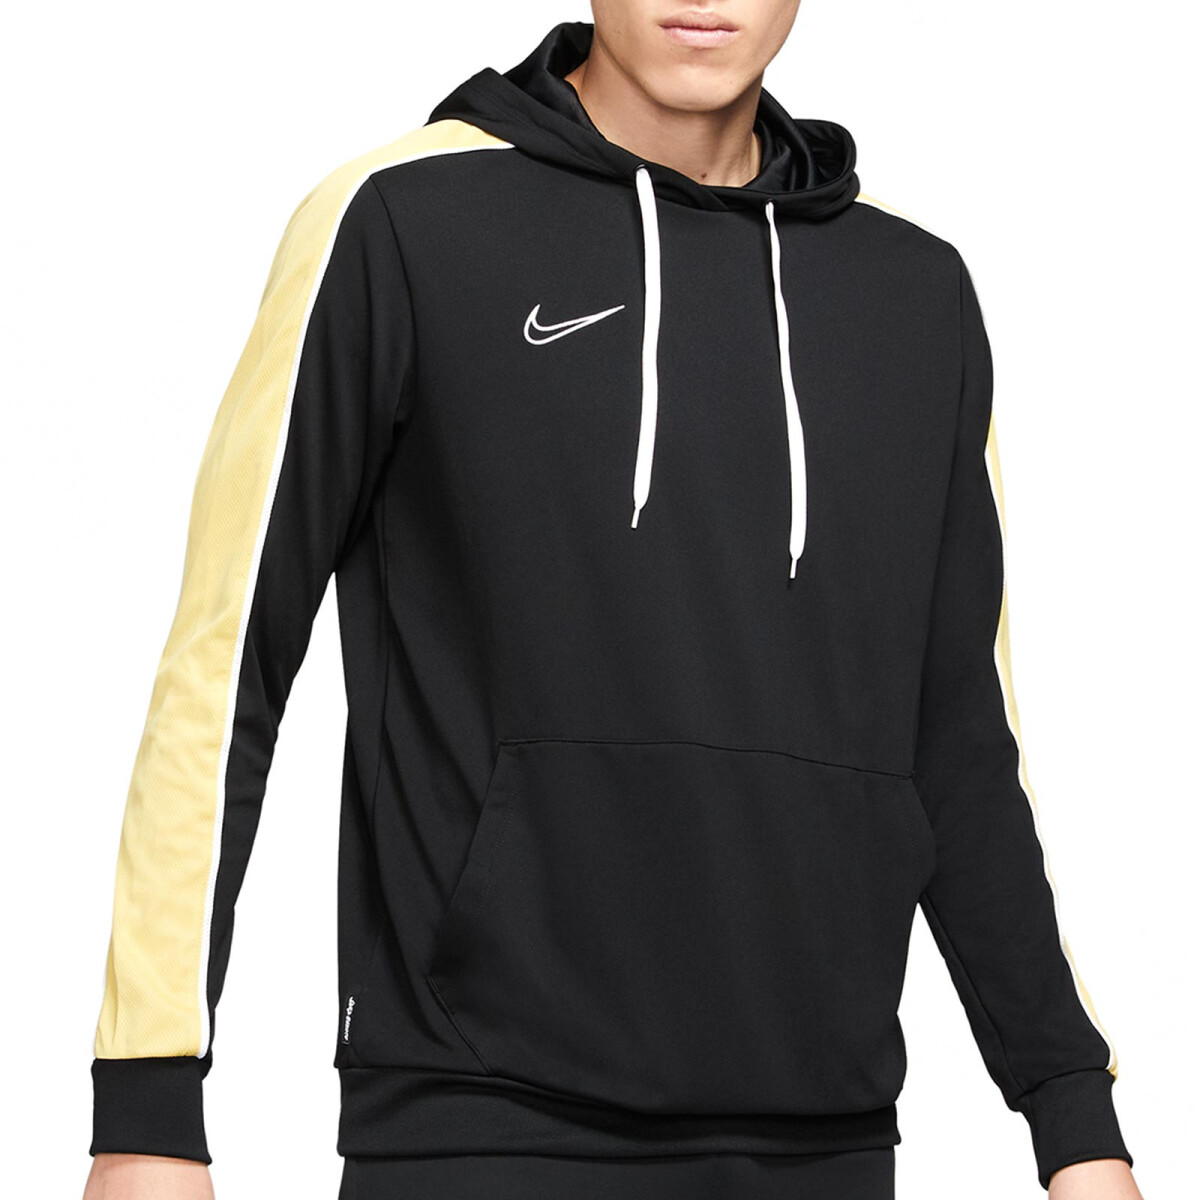 Canguro Nike Training Hombre Dry Acd Hoodie Po Fp Jb Black/Saturn Gold/(WH - Color Único 